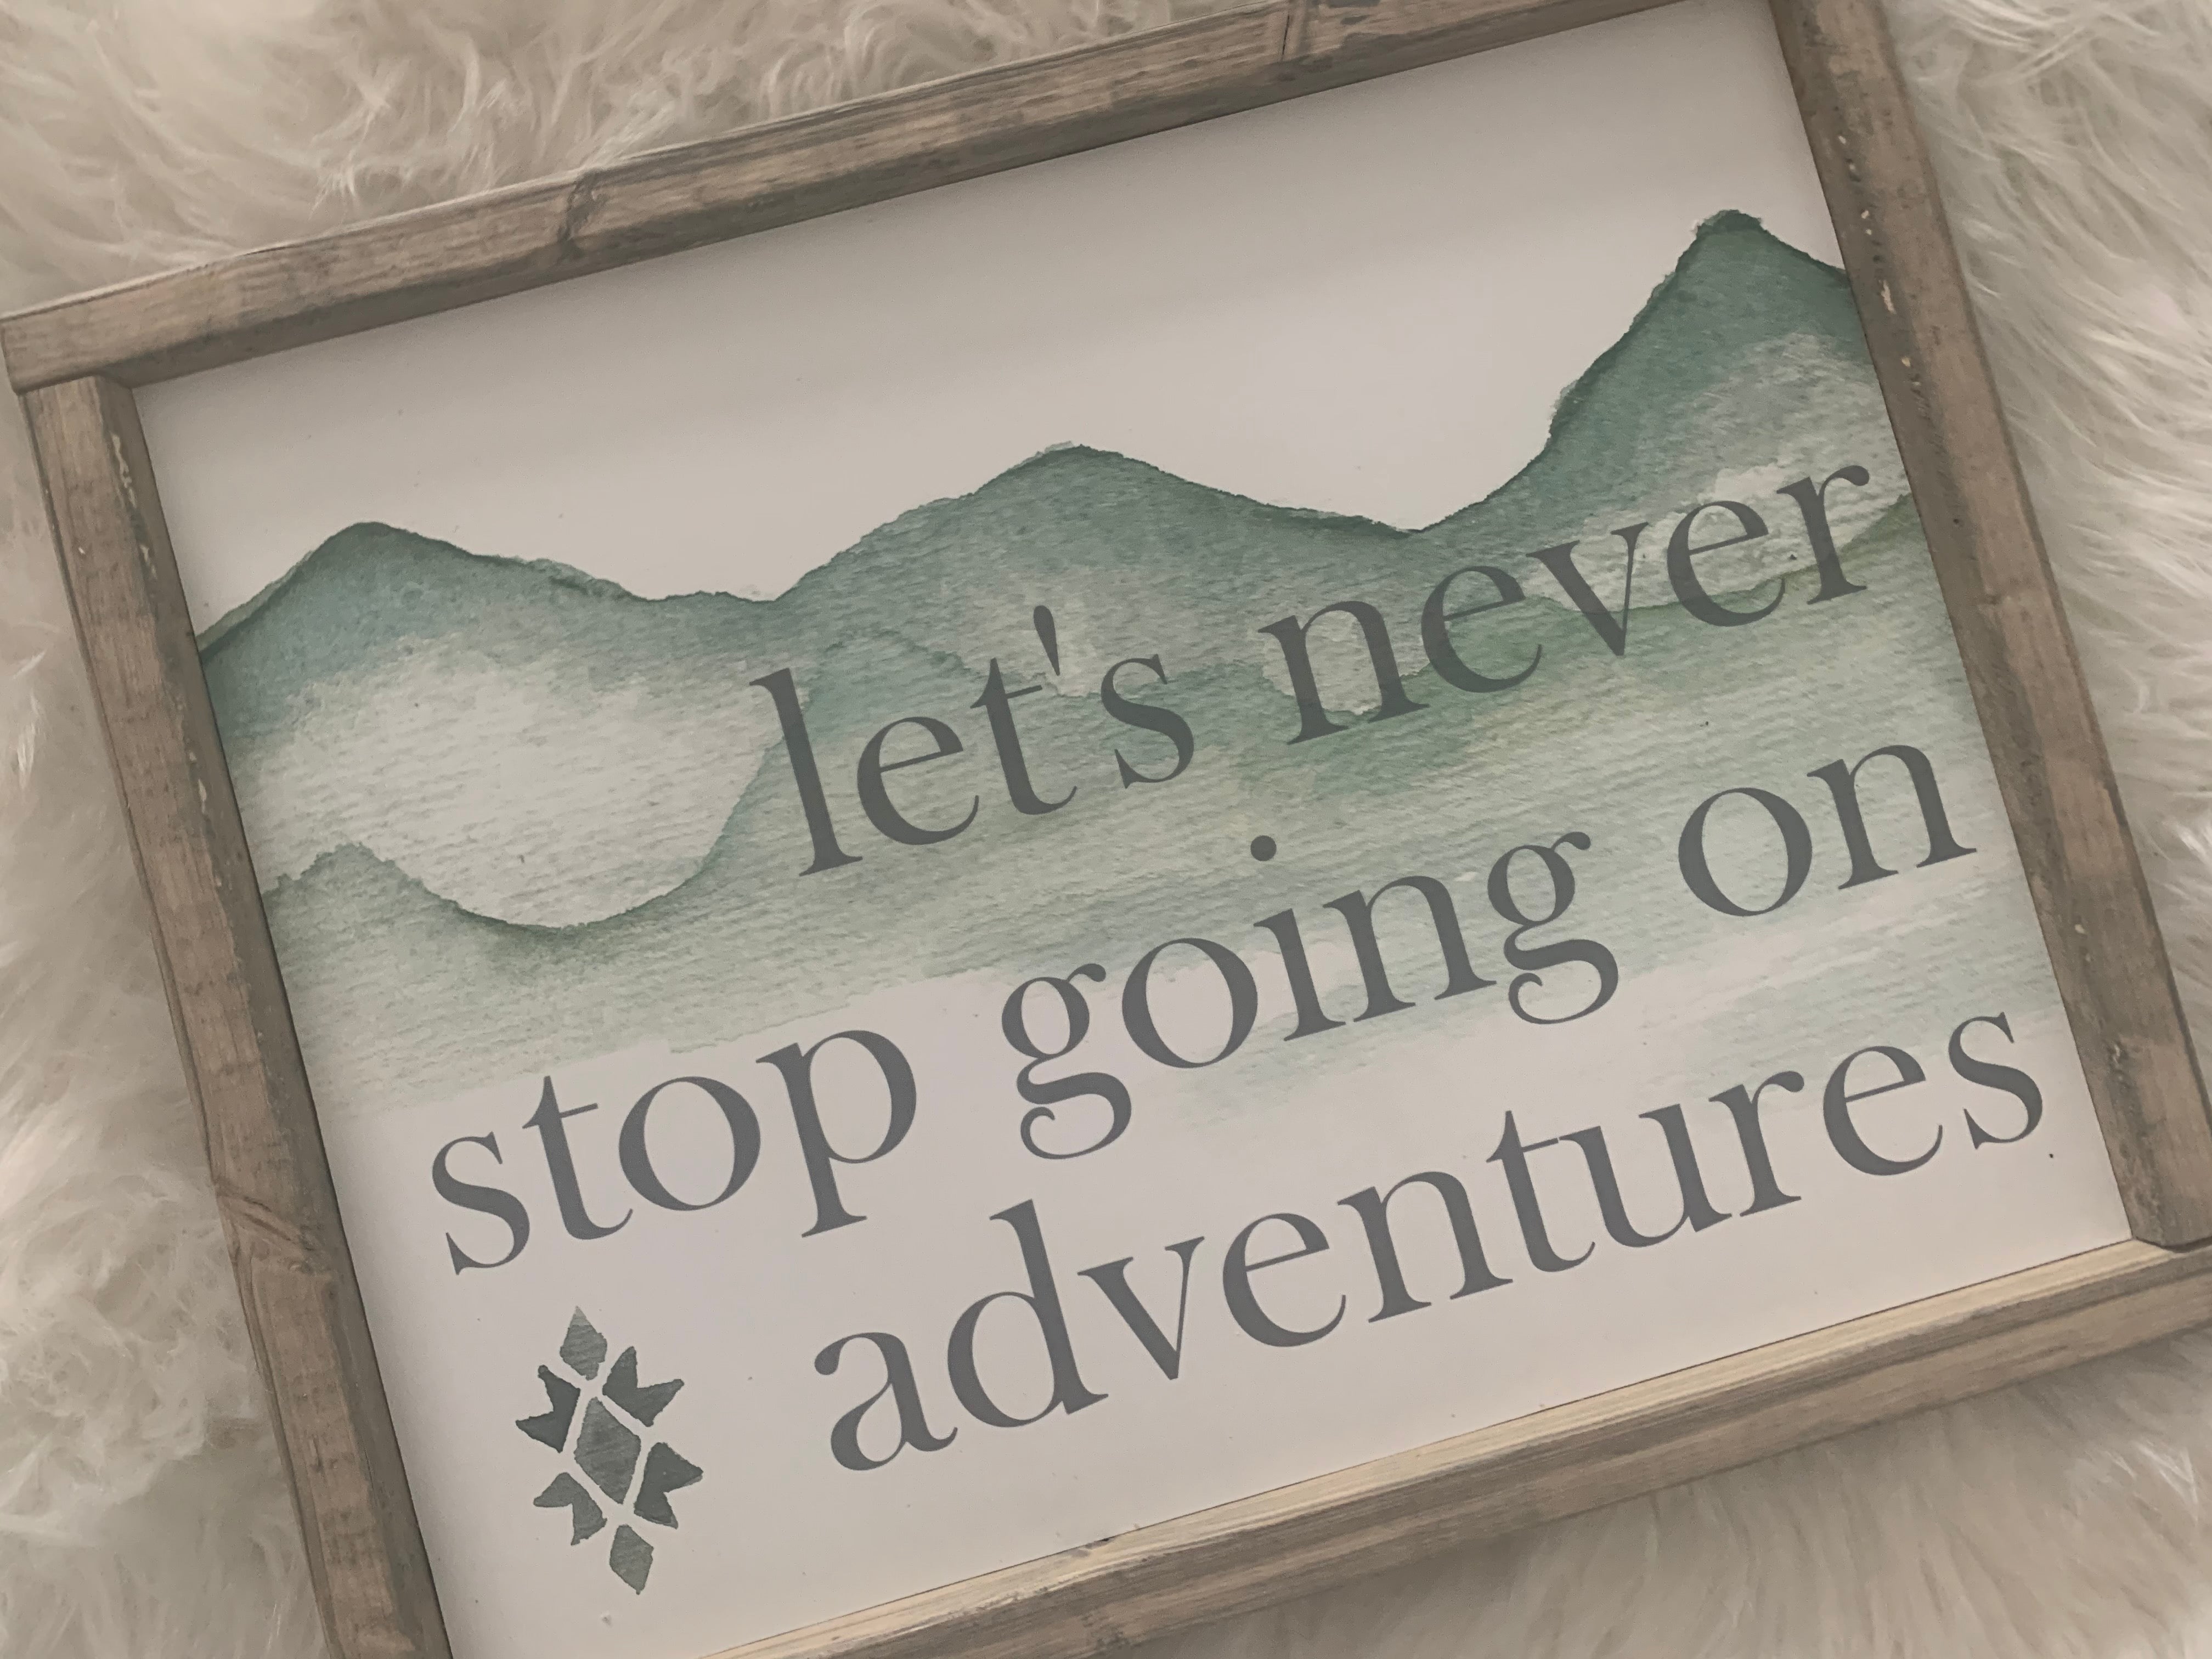 Let’s Never Stop Going on Adventures